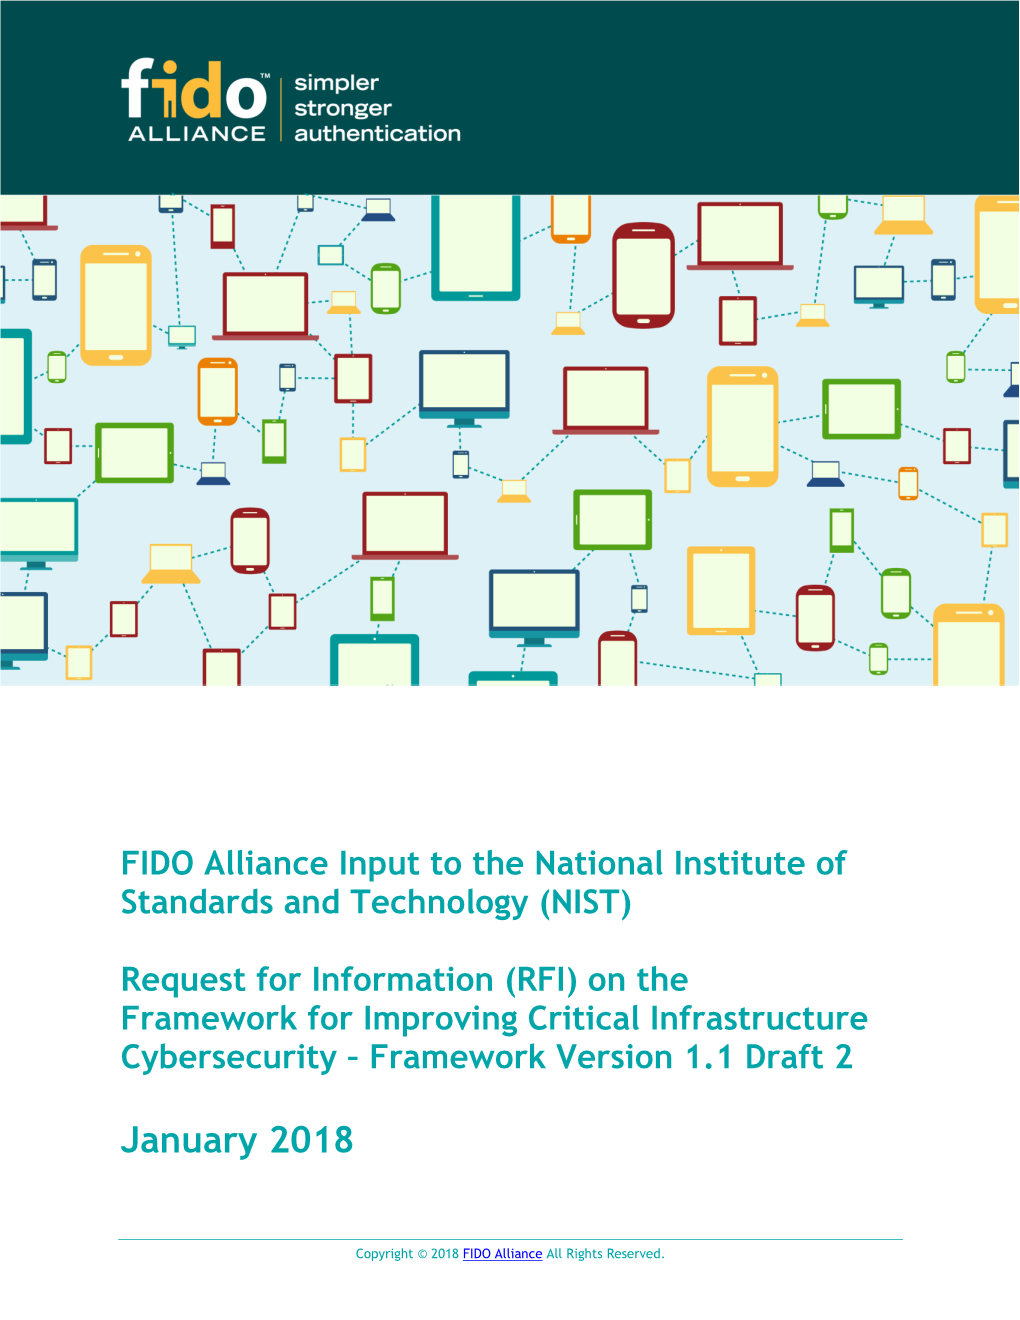 FIDO Alliance Input to the National Institute of Standards and Technology (NIST)